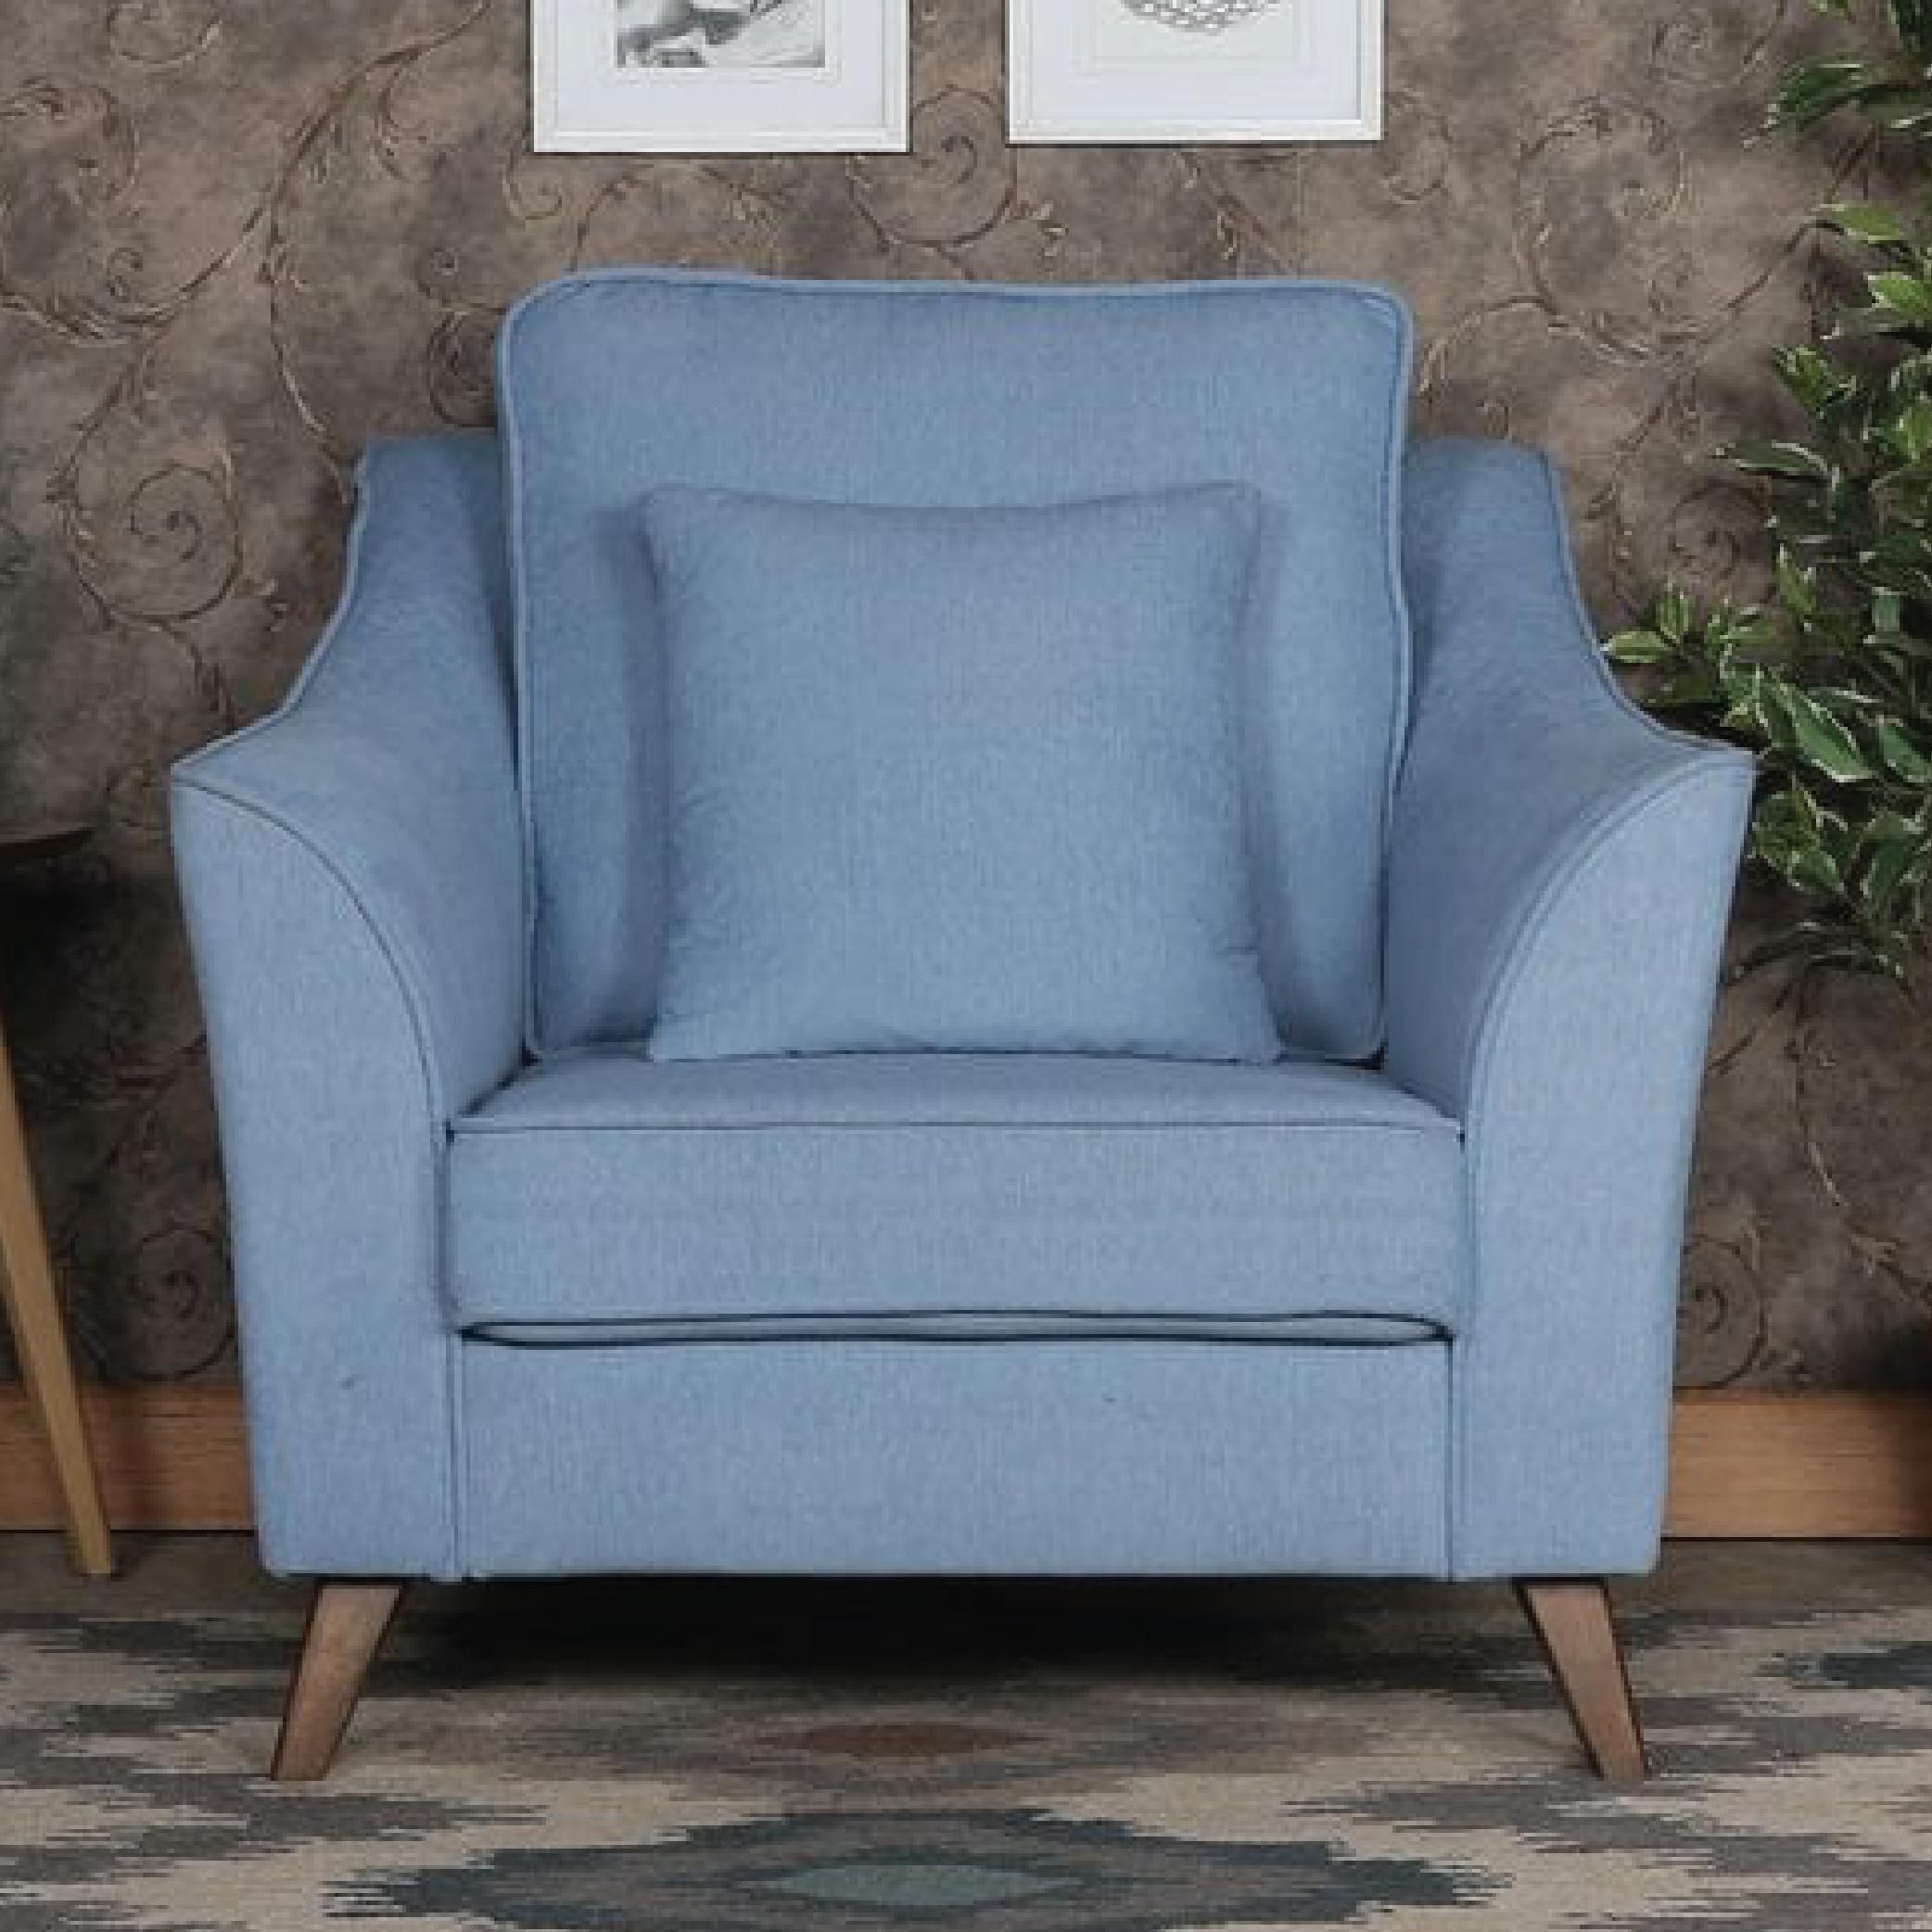 Sessa One Seater Sofa in Ice Blue Colour